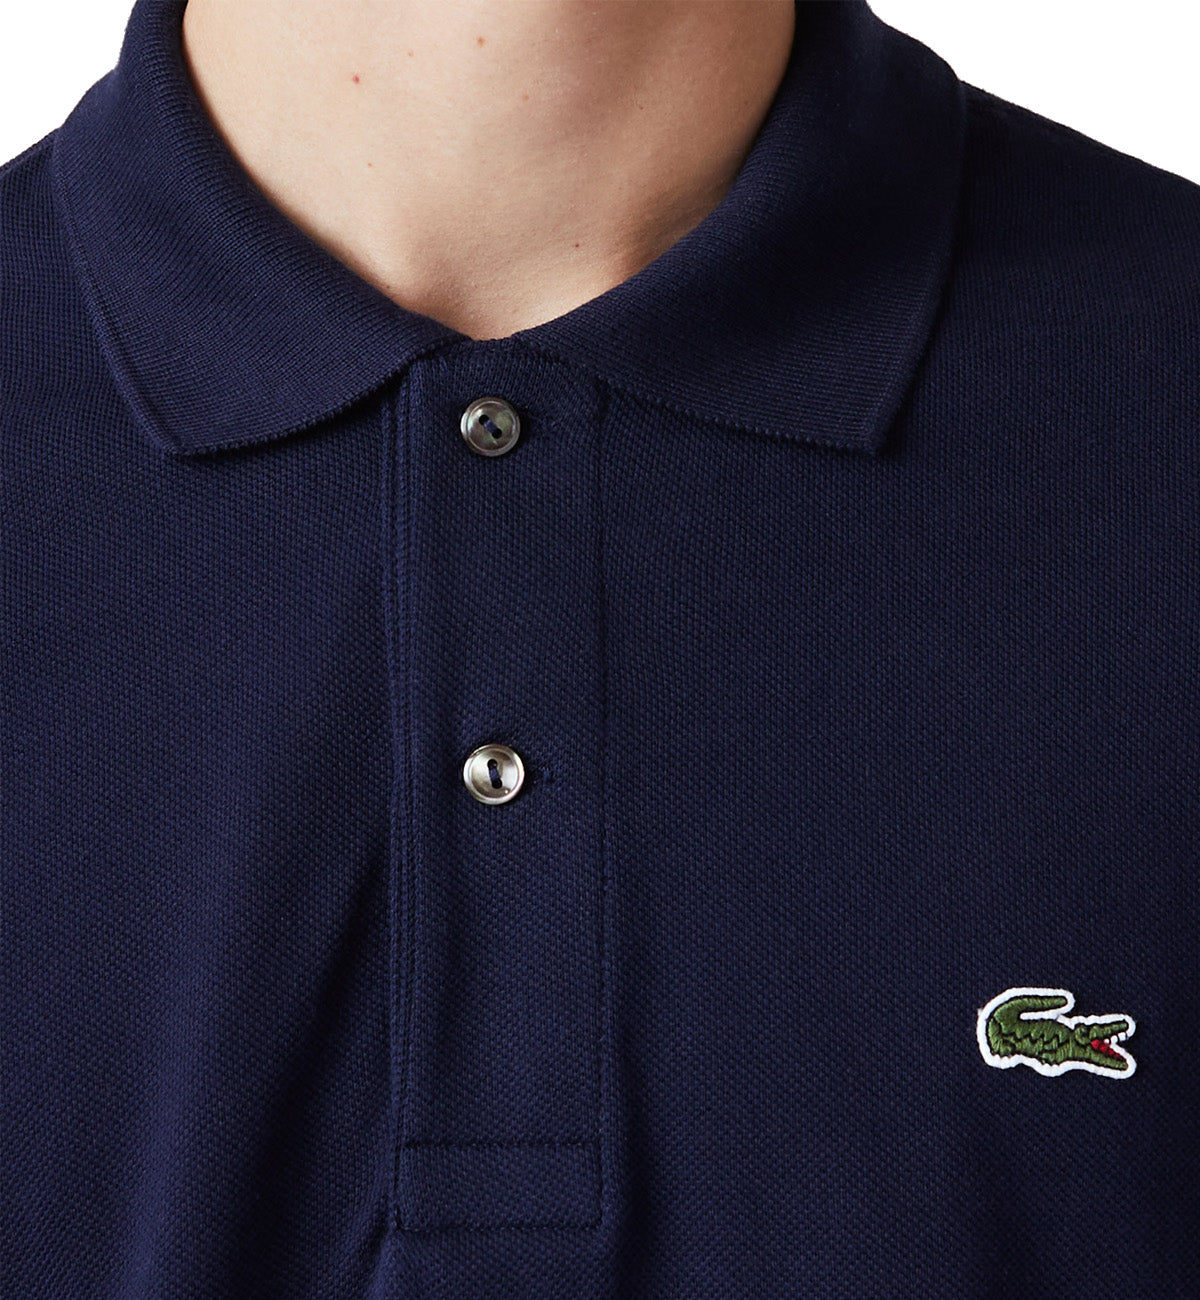 Lacoste Classic Fit Cotton Polo Shirt (Navy)